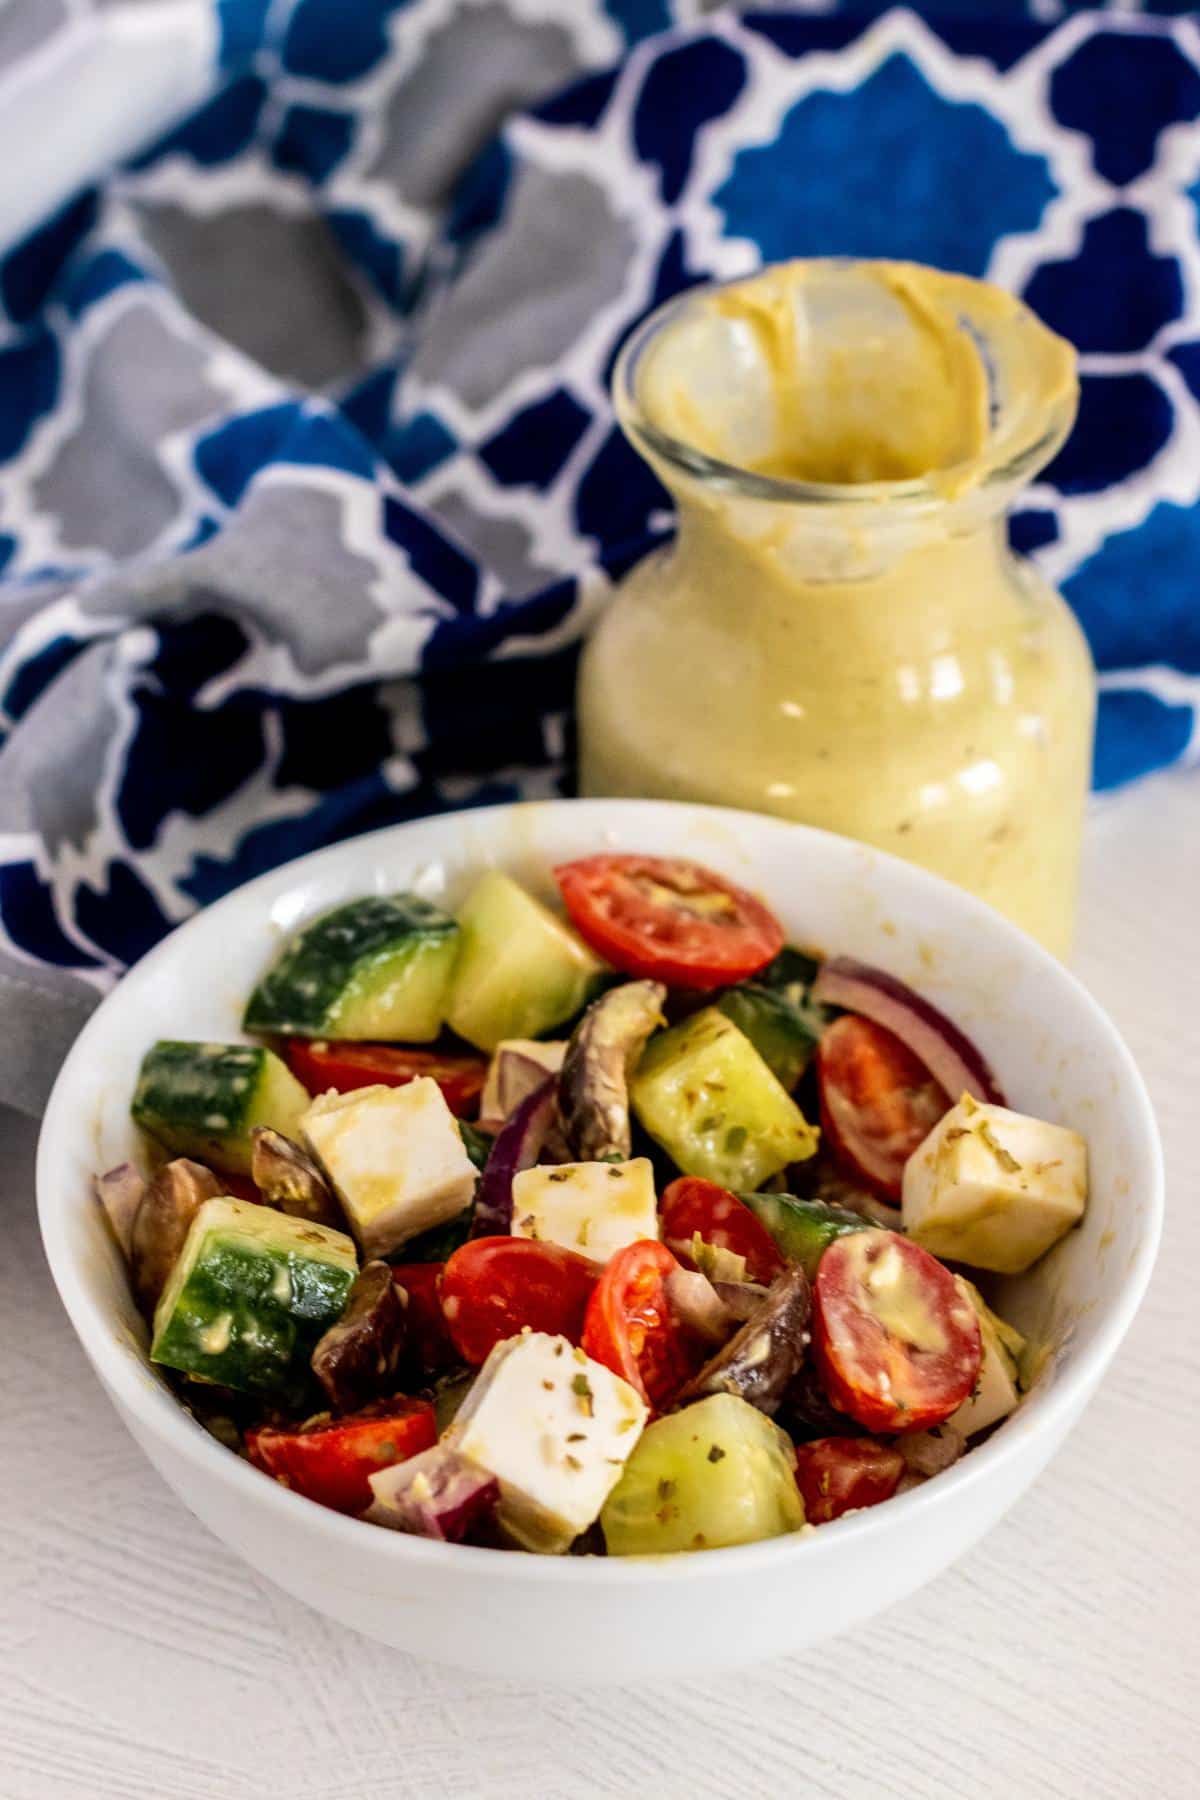 Bowl of vegan Greek salad made with vegan feta cubes, cucumbers, tomatoes, red onions, and black olives with bottle of avocado dressing next to it and blue patterned napkin.